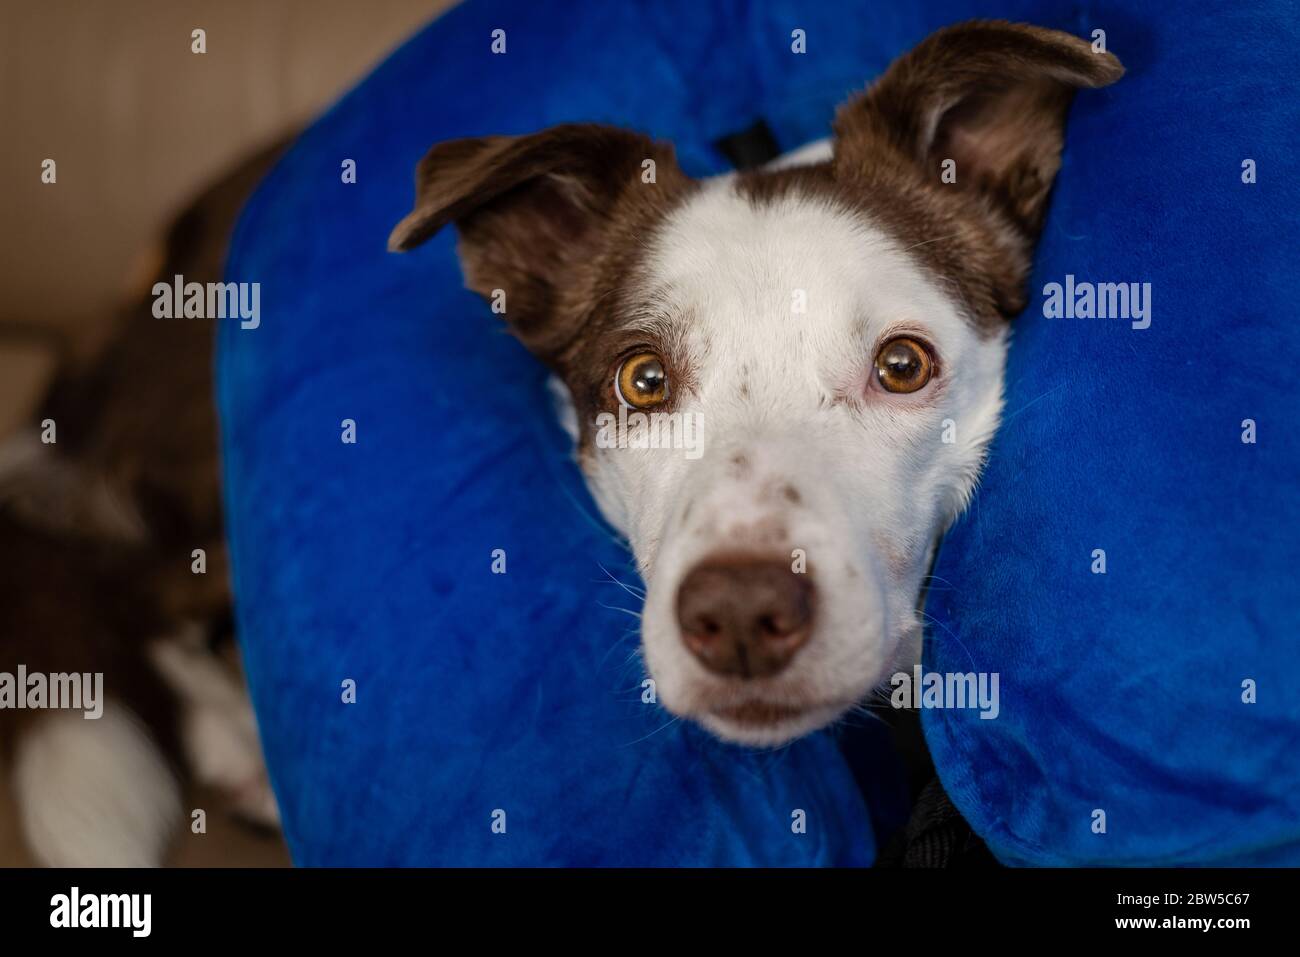 Cute Border Collie dog on a couch, wearing blue inflatable collar Stock Photo